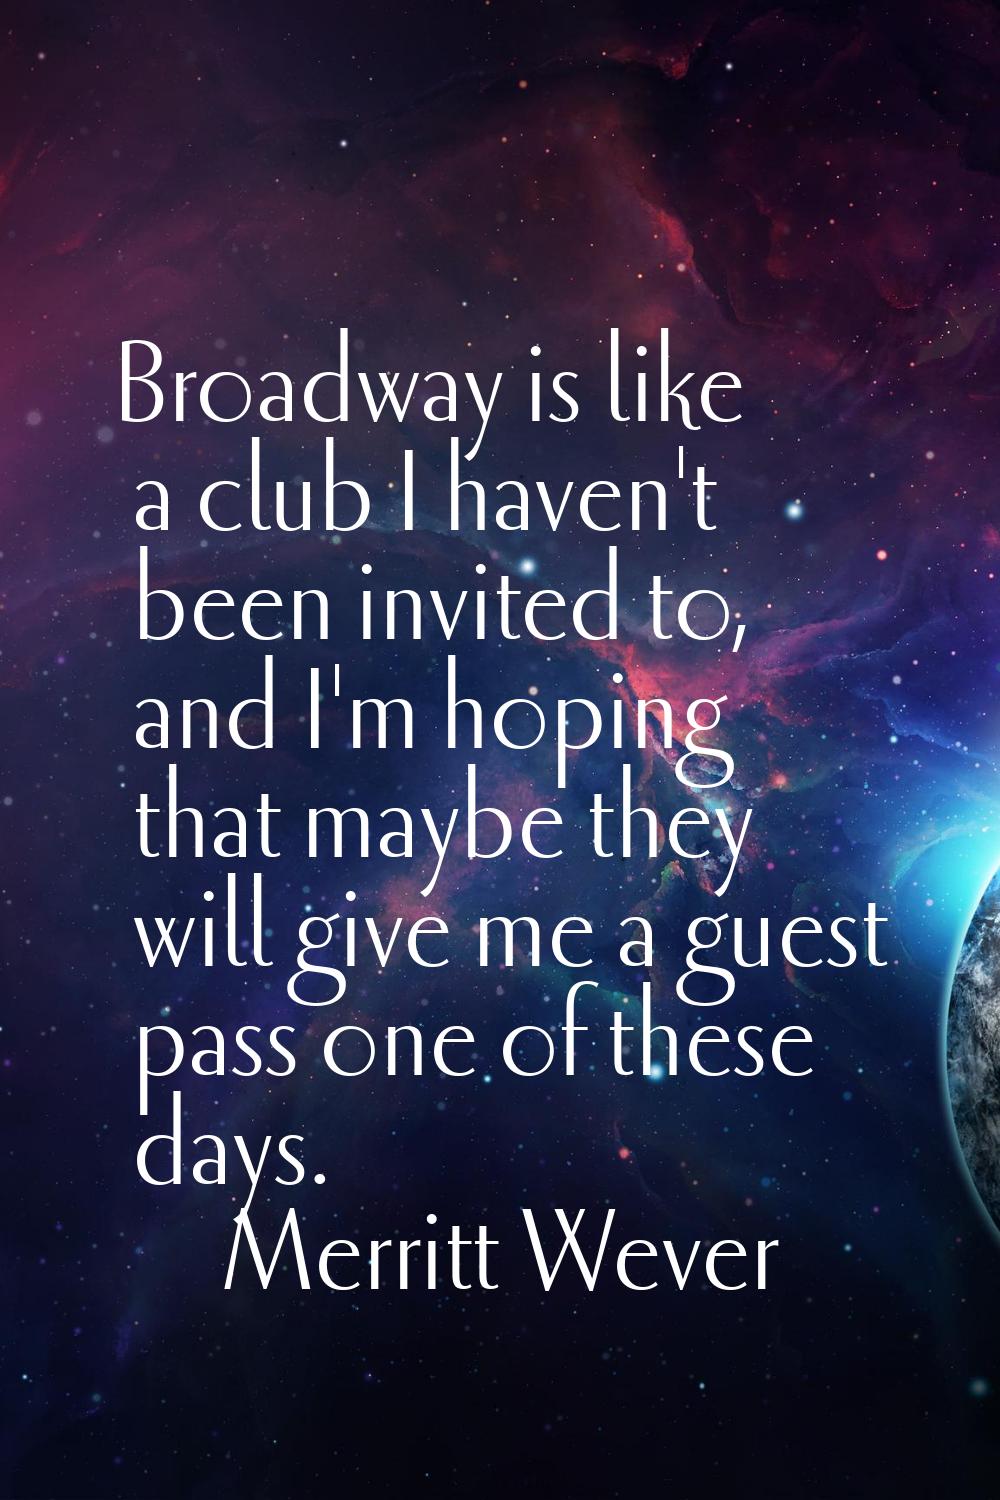 Broadway is like a club I haven't been invited to, and I'm hoping that maybe they will give me a gu